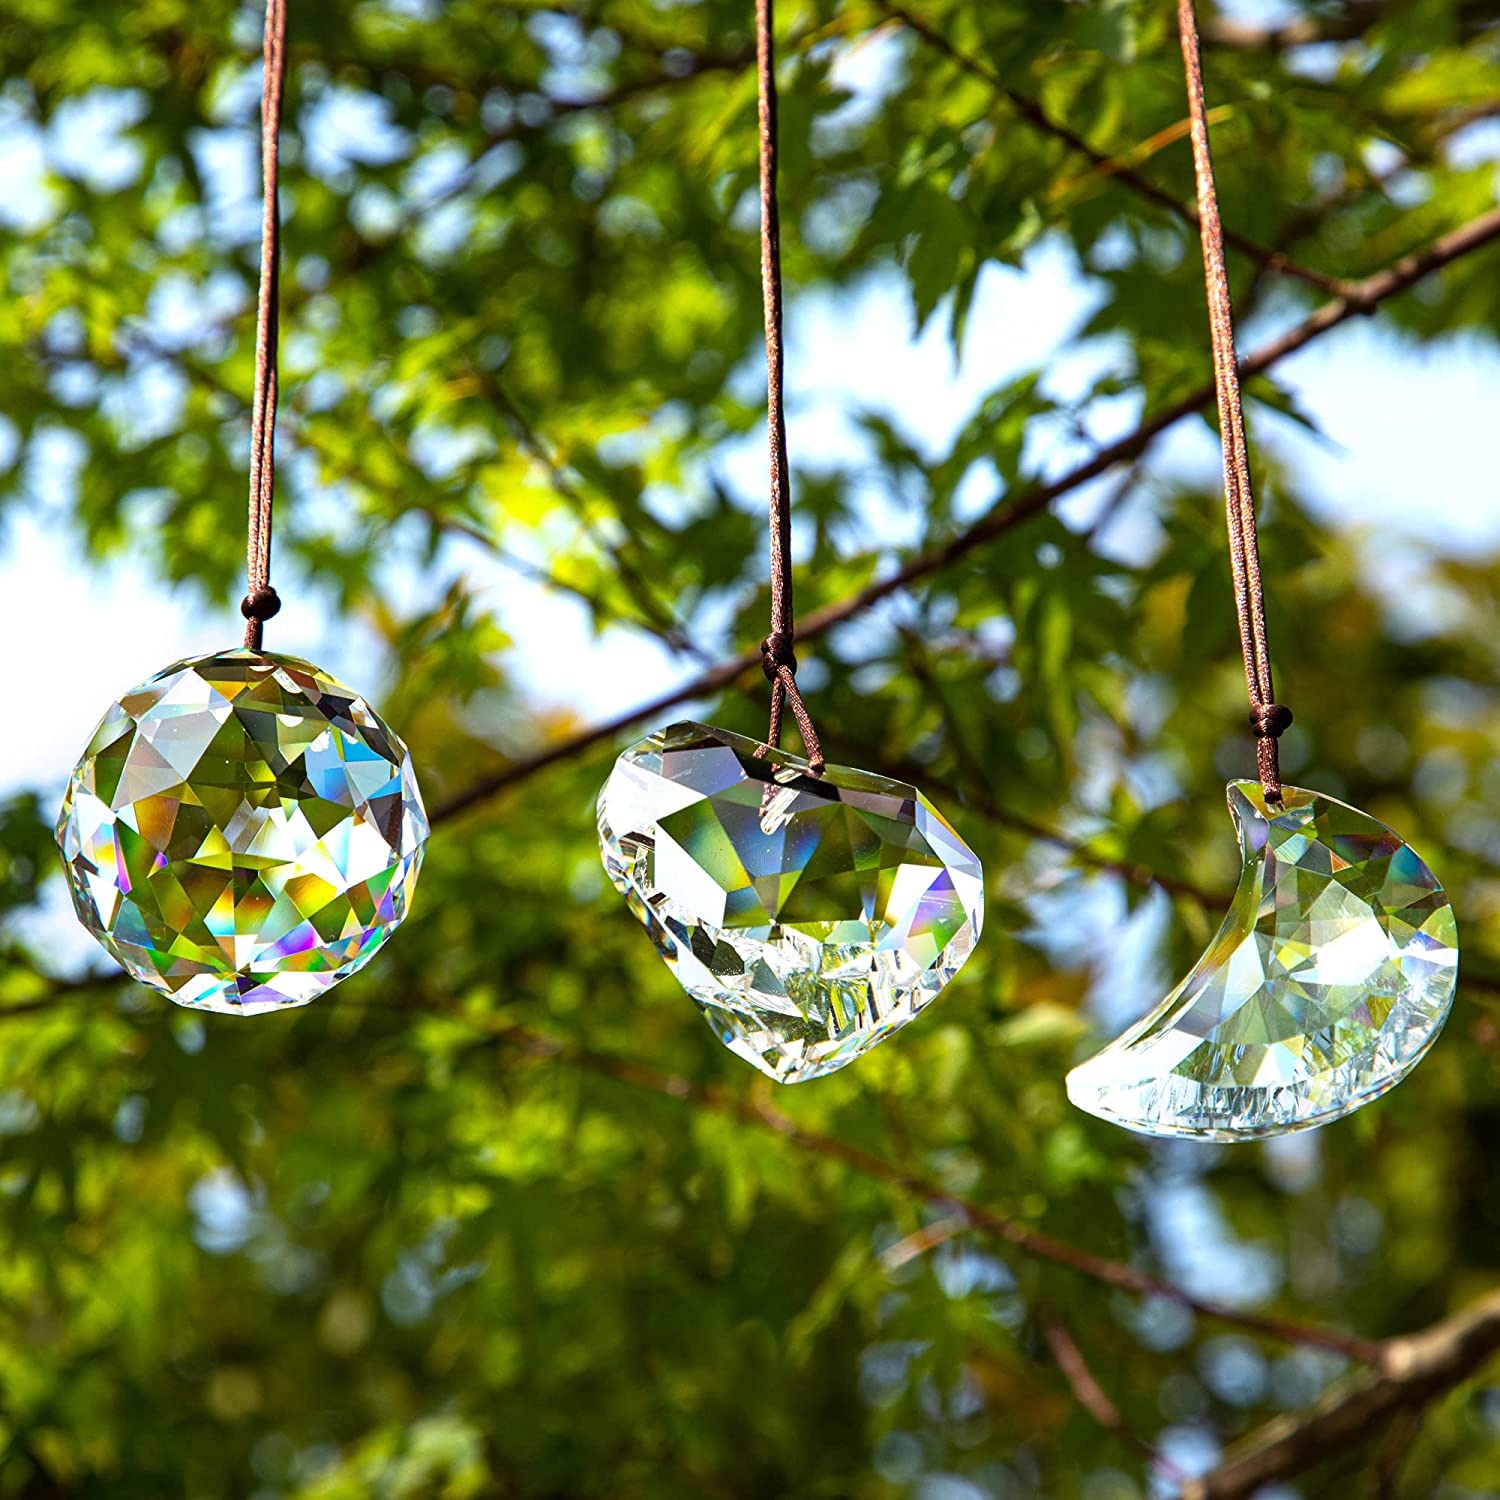 3 pcs Hanging Crystal Suncatcher Prism Ball Heart Moon Window Decor Car Charms,Christmas Gift for Her,Kids,Hanging Holiday Decorations